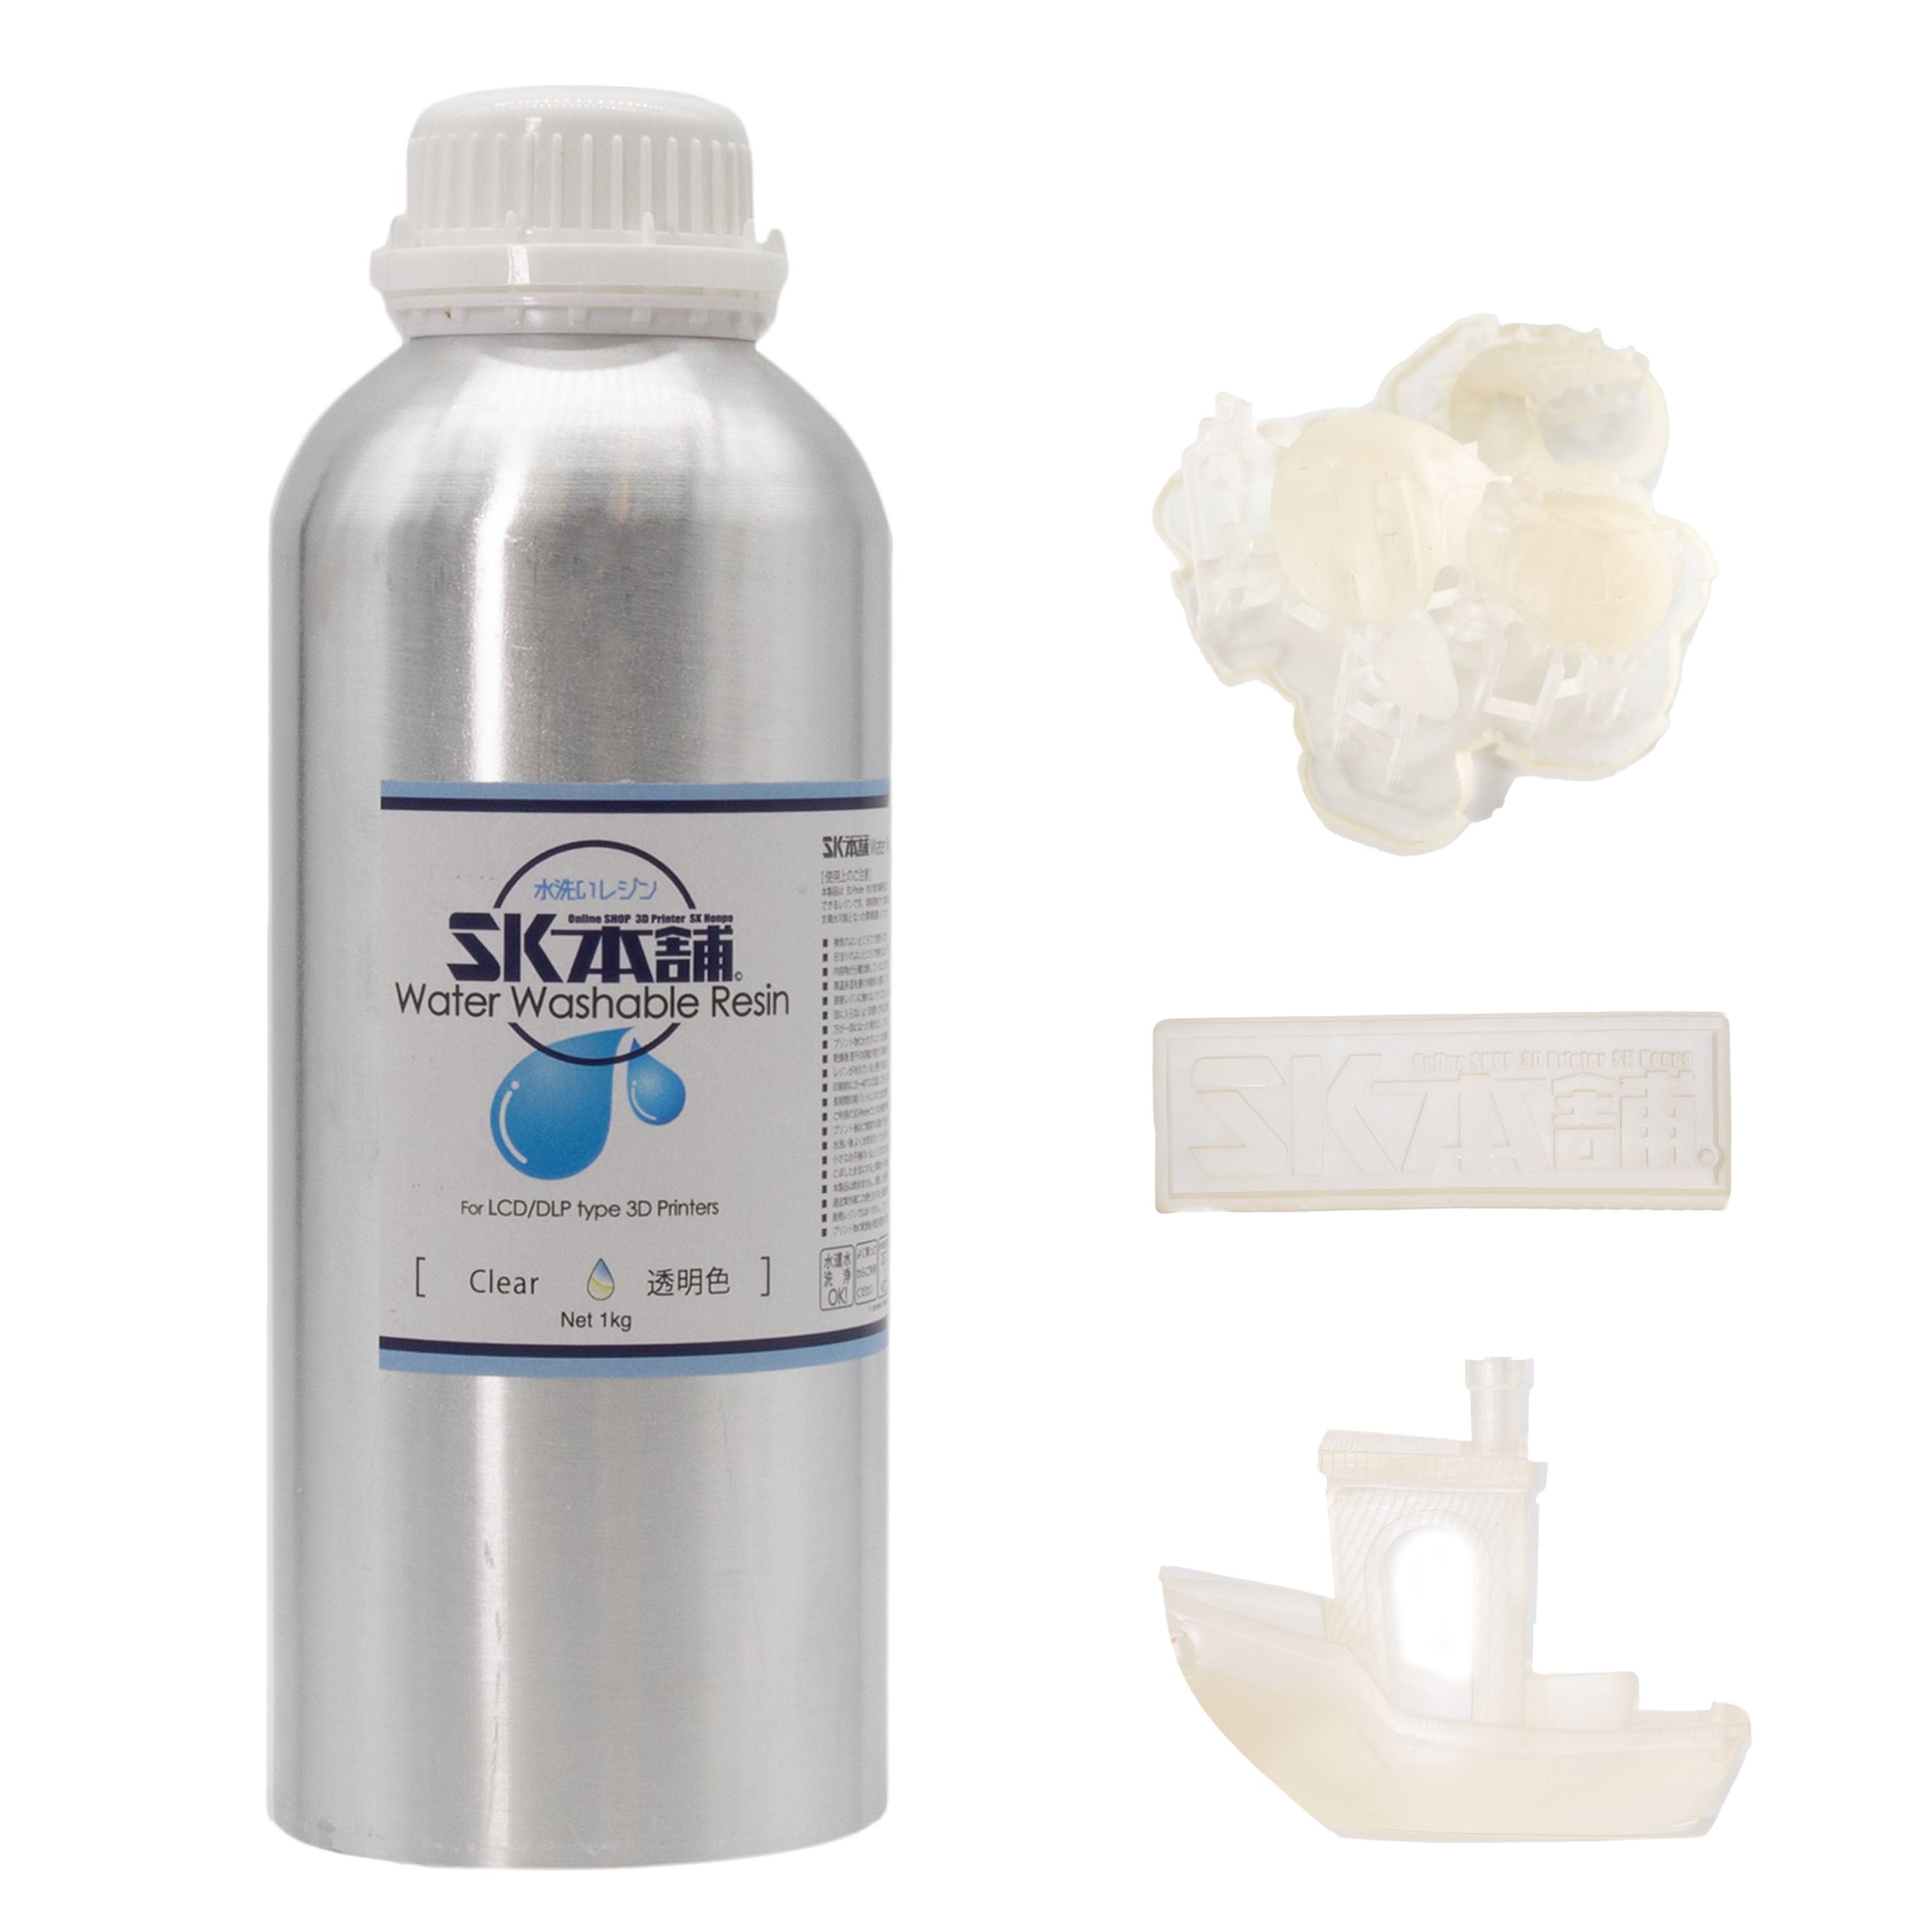 SK Waterwashable Resin clear_1000g